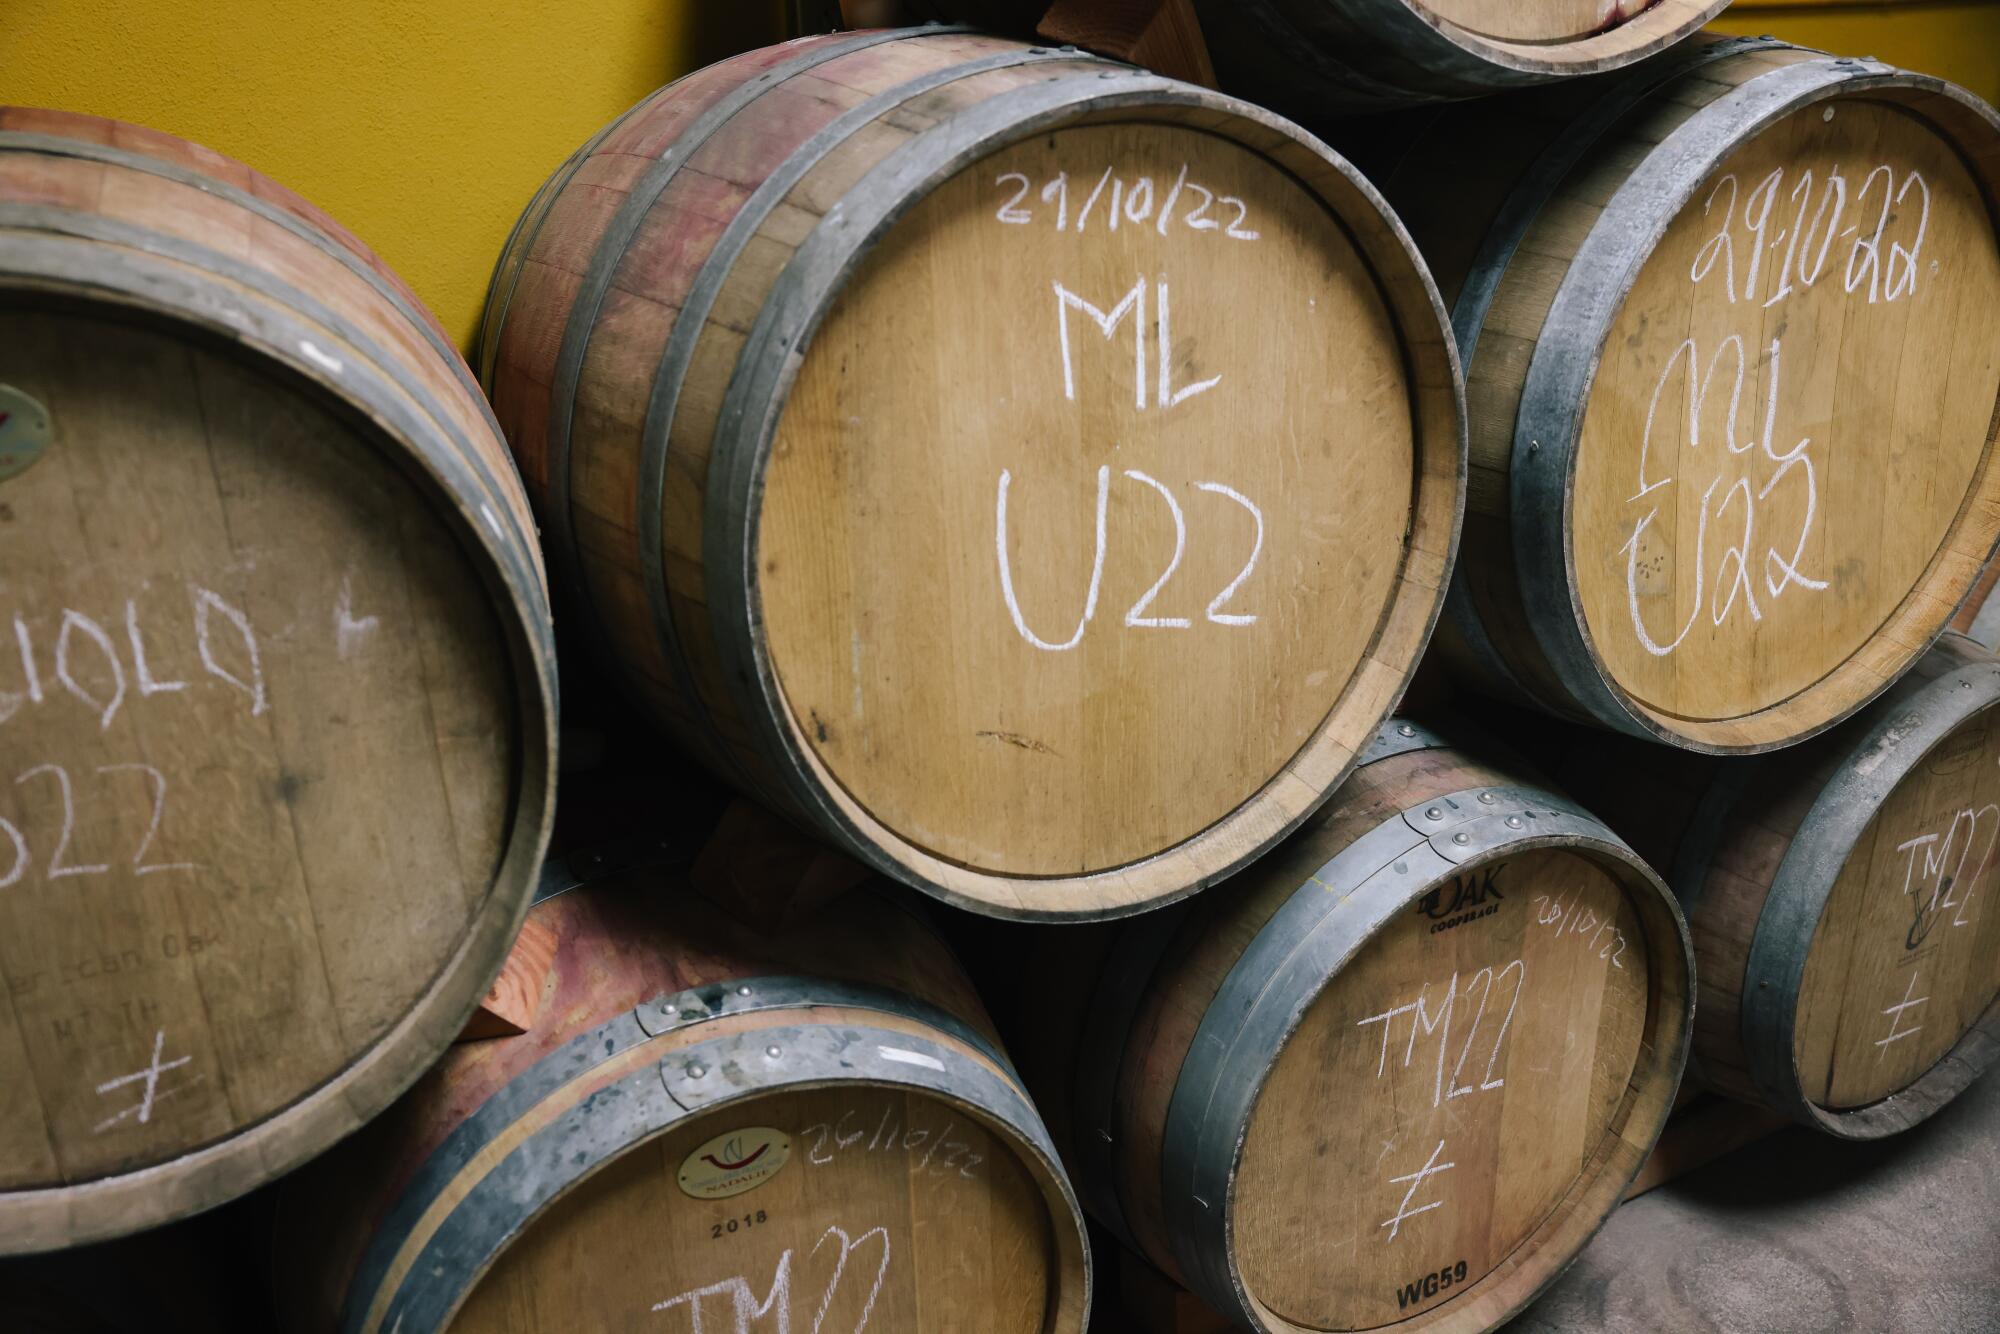 Oak barrels stacked up, with dates and numbers written on them.